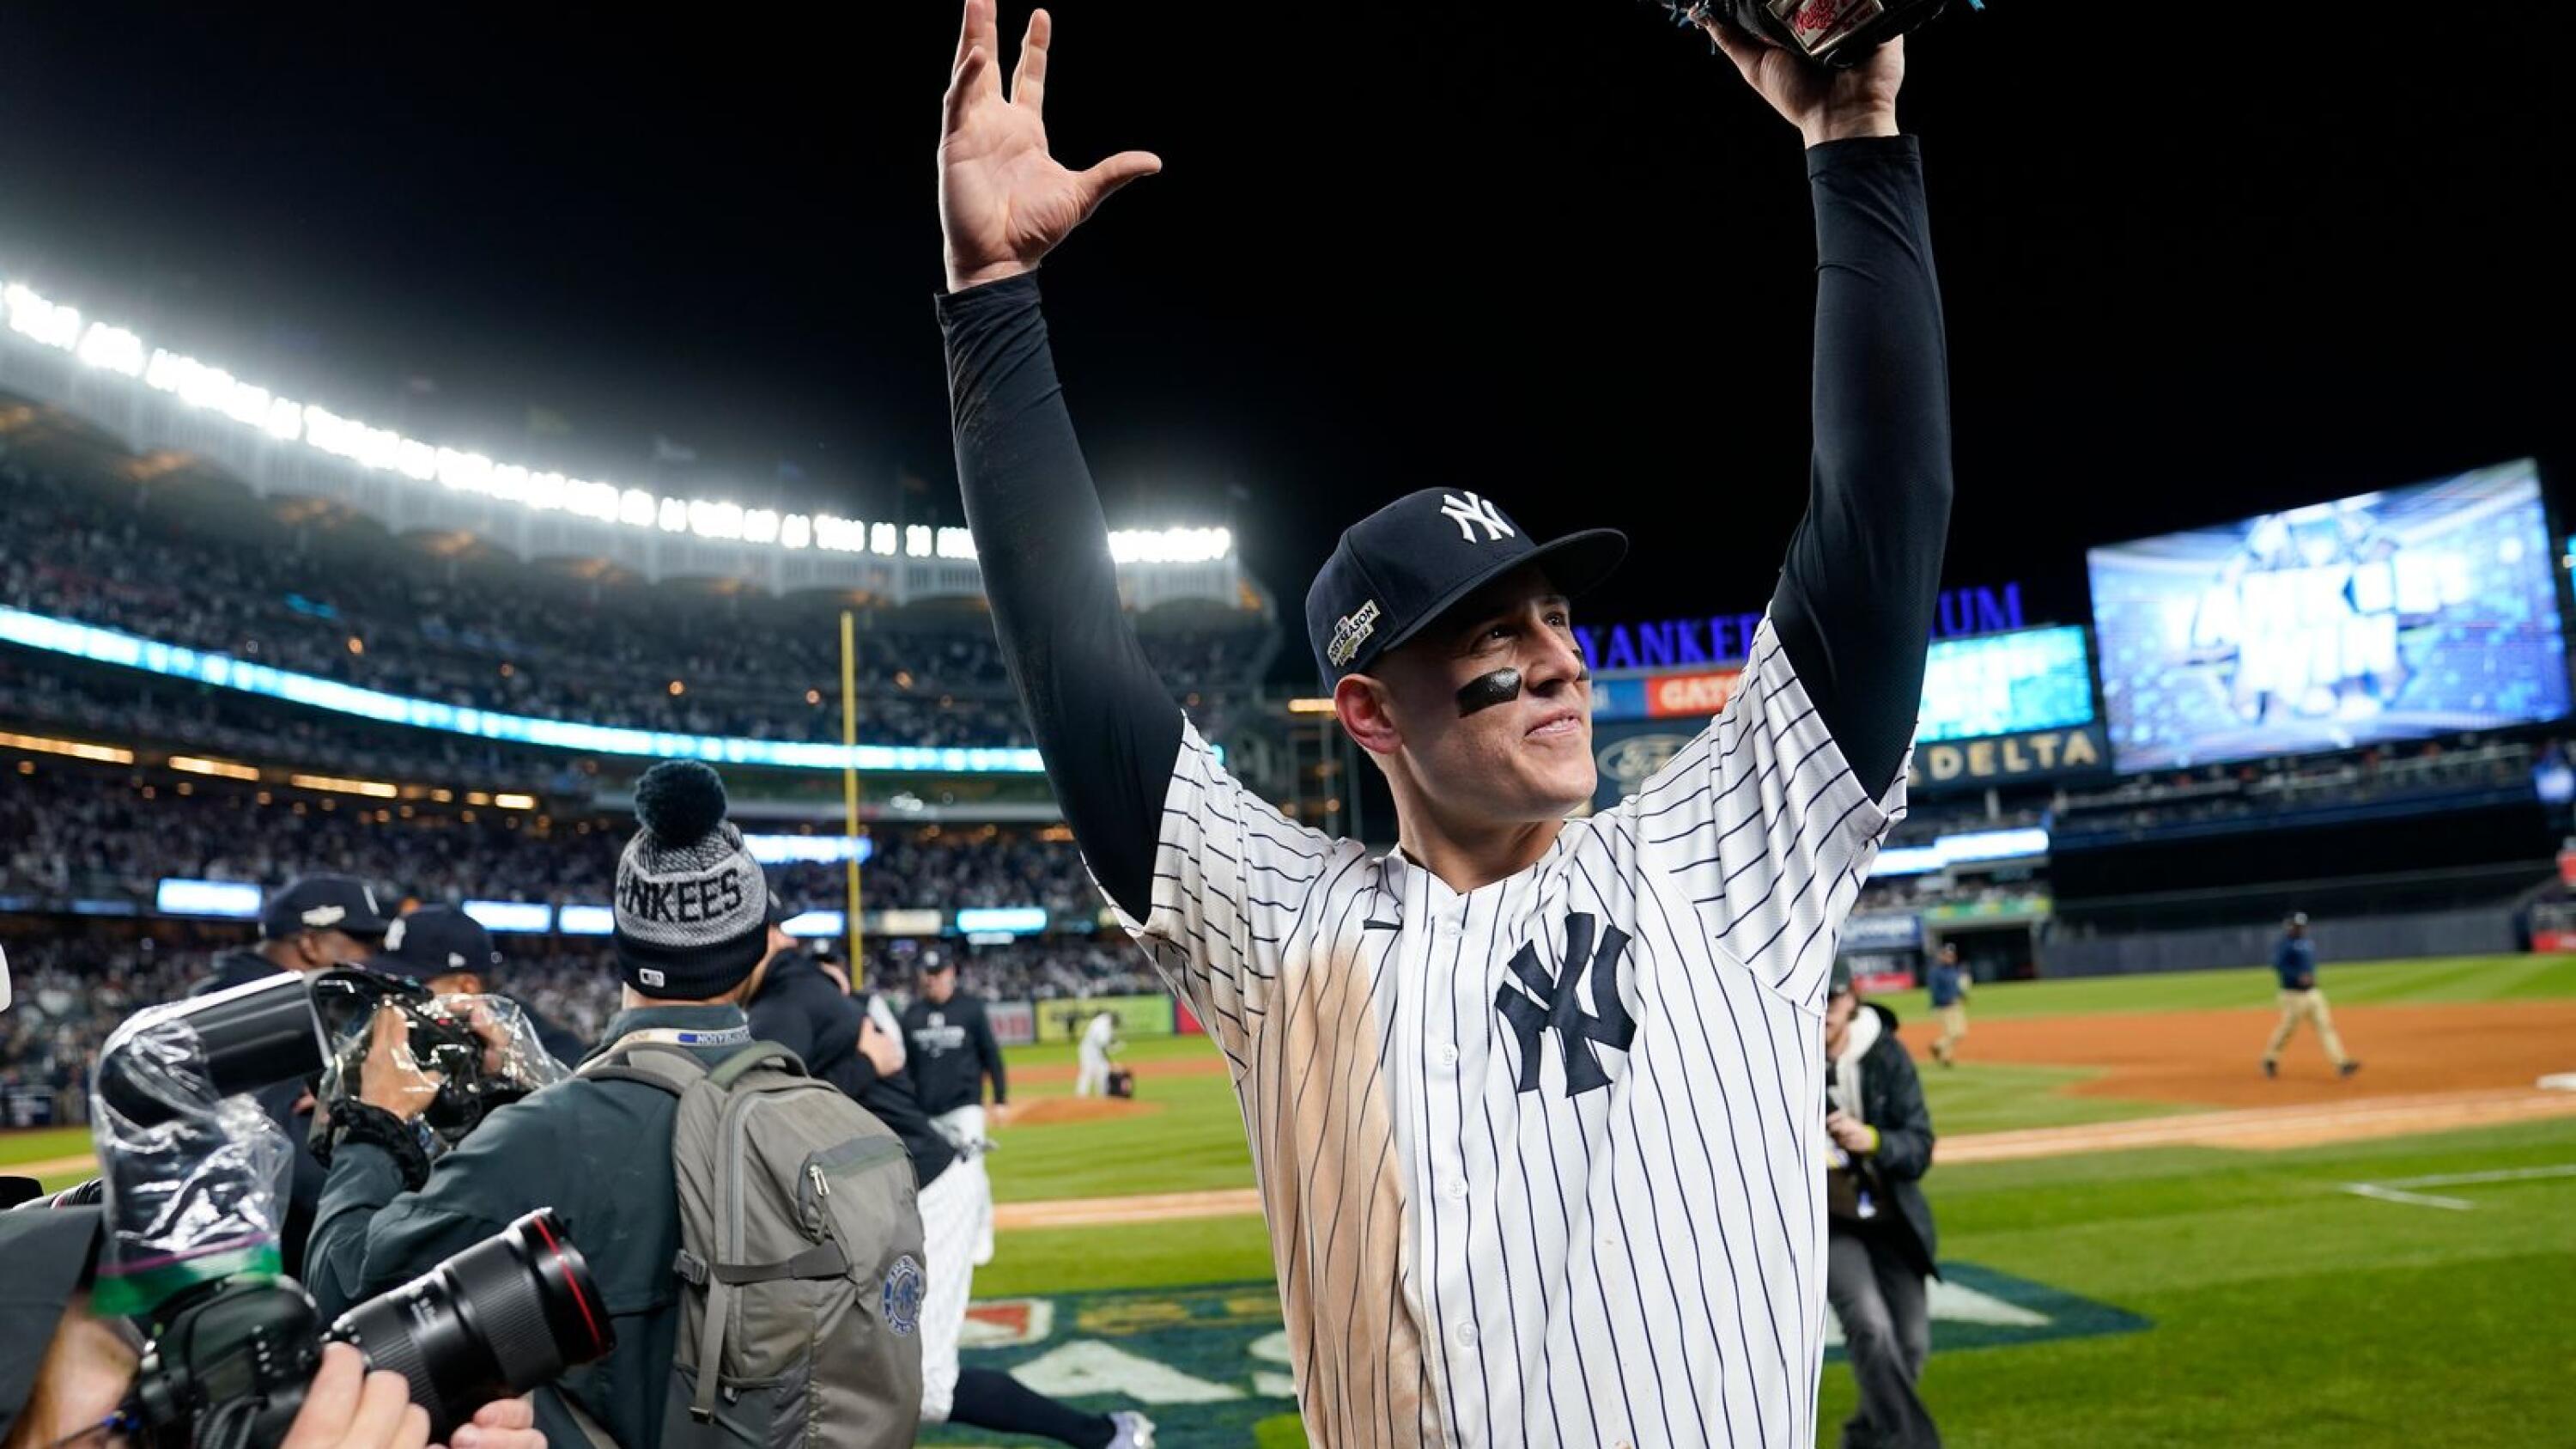 Judge HR sparks NY, Yanks beat Astros 6-4 to even ALCS at 2 – The